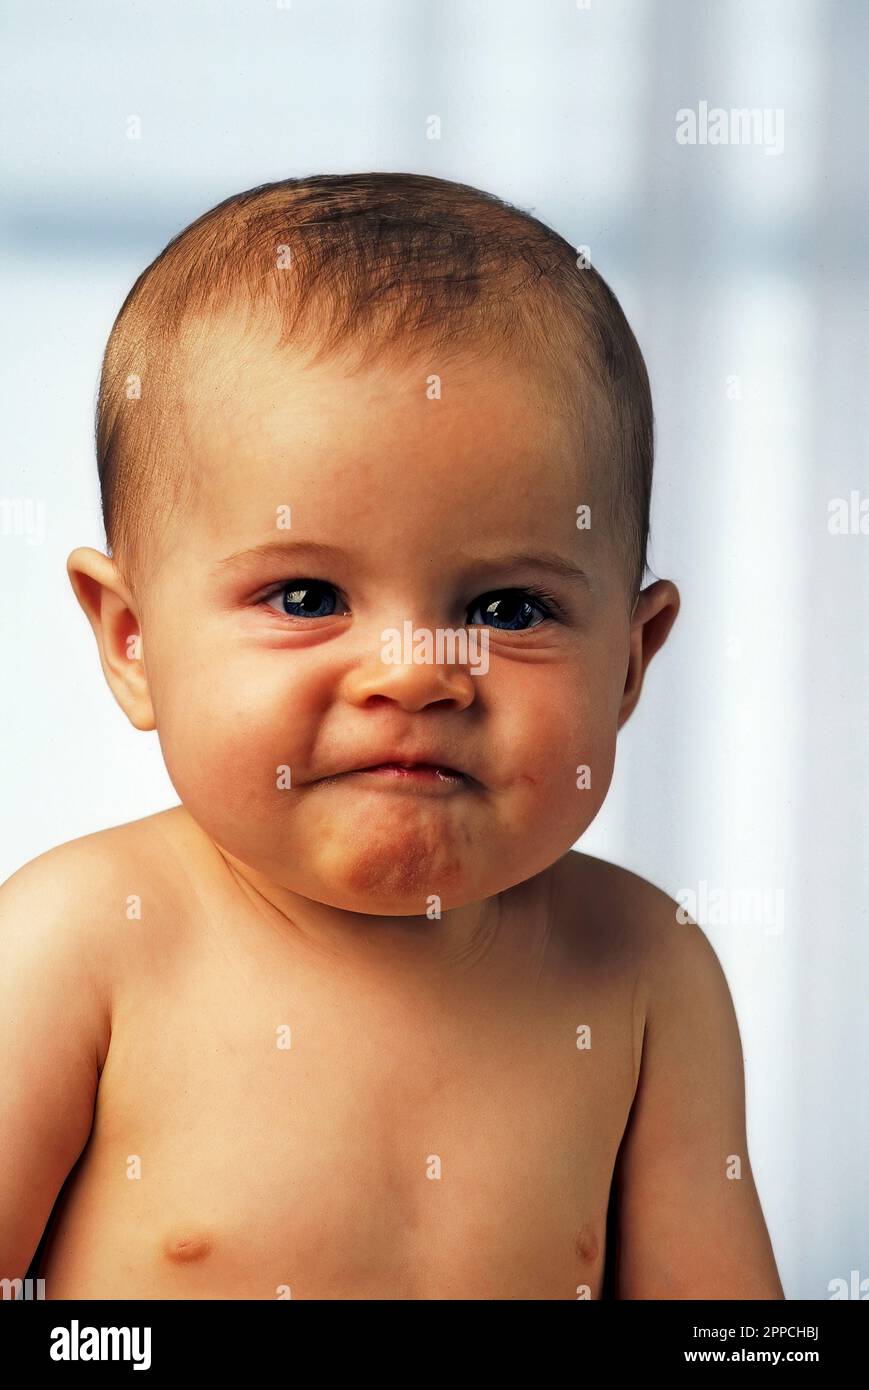 Caucasian baby with a funny expression Stock Photo